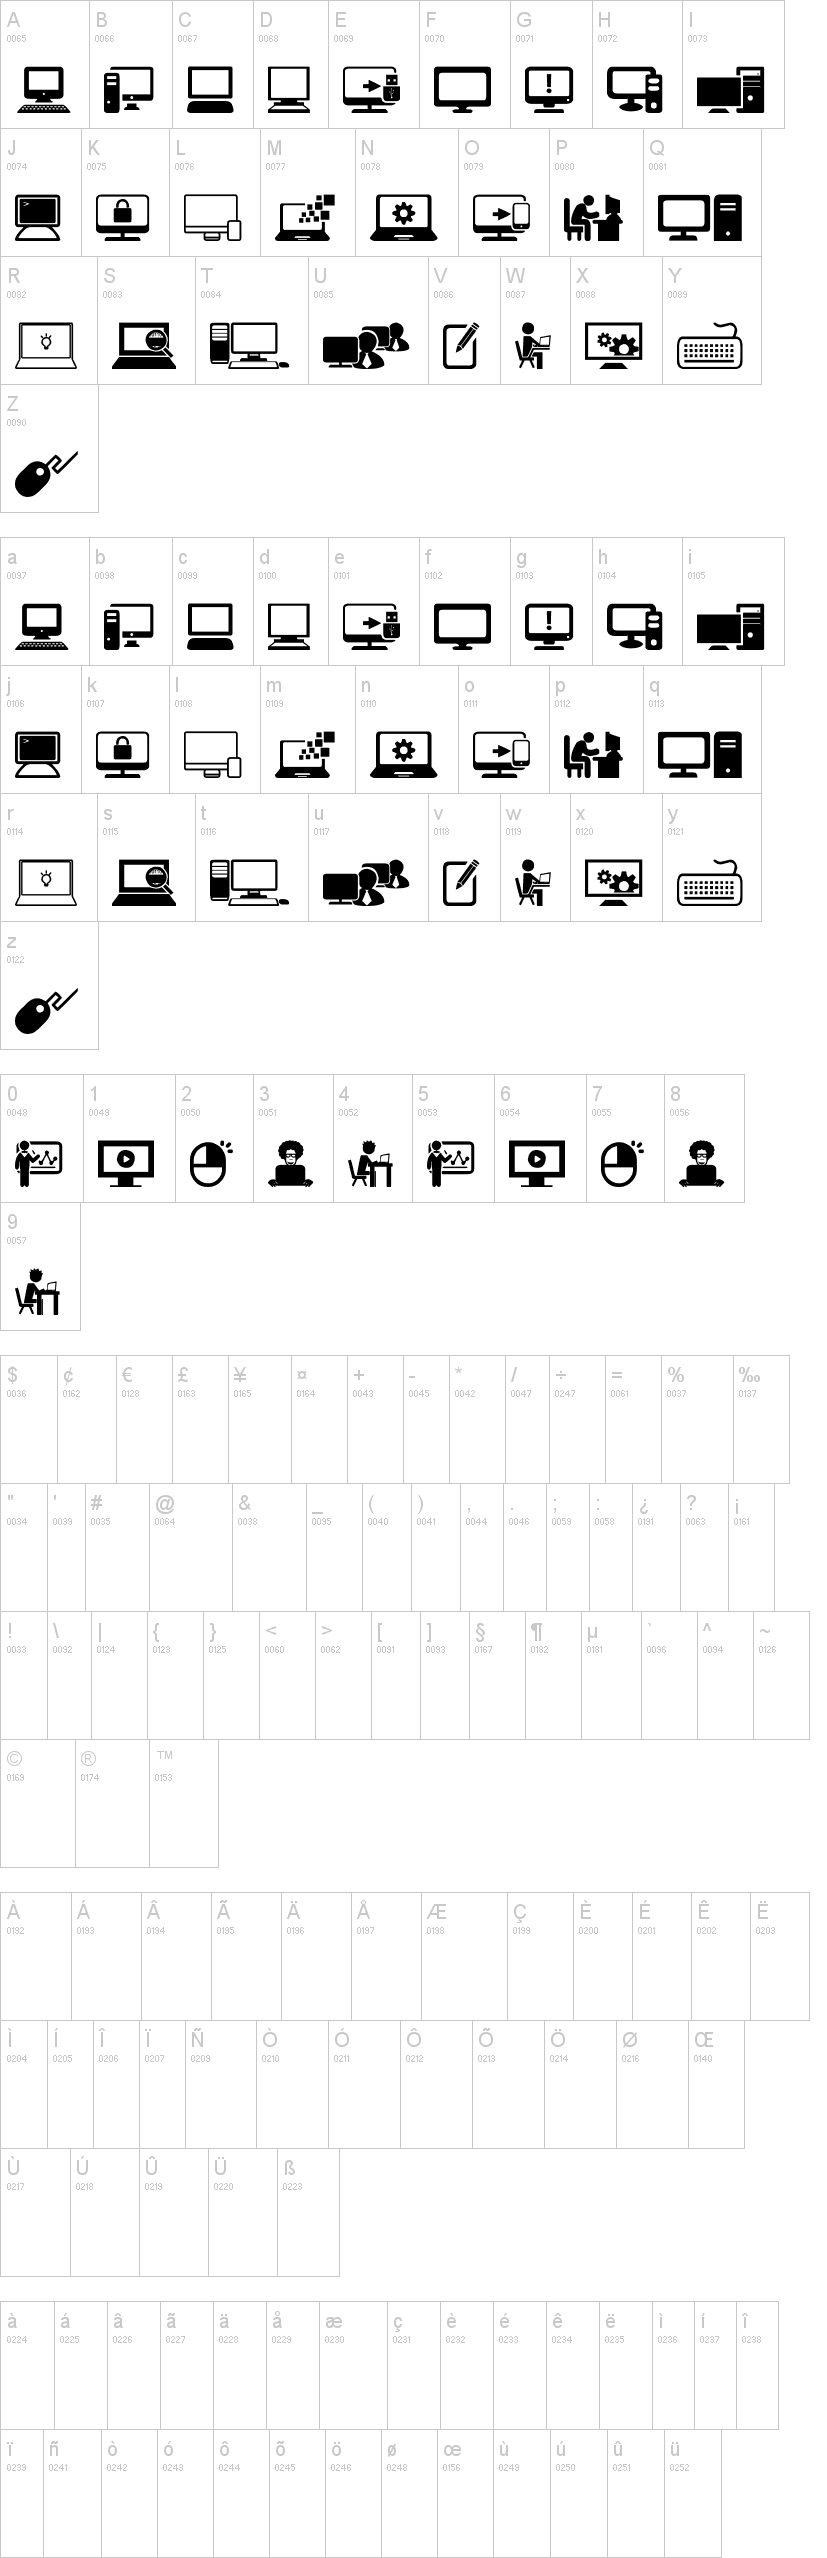 Computer icons